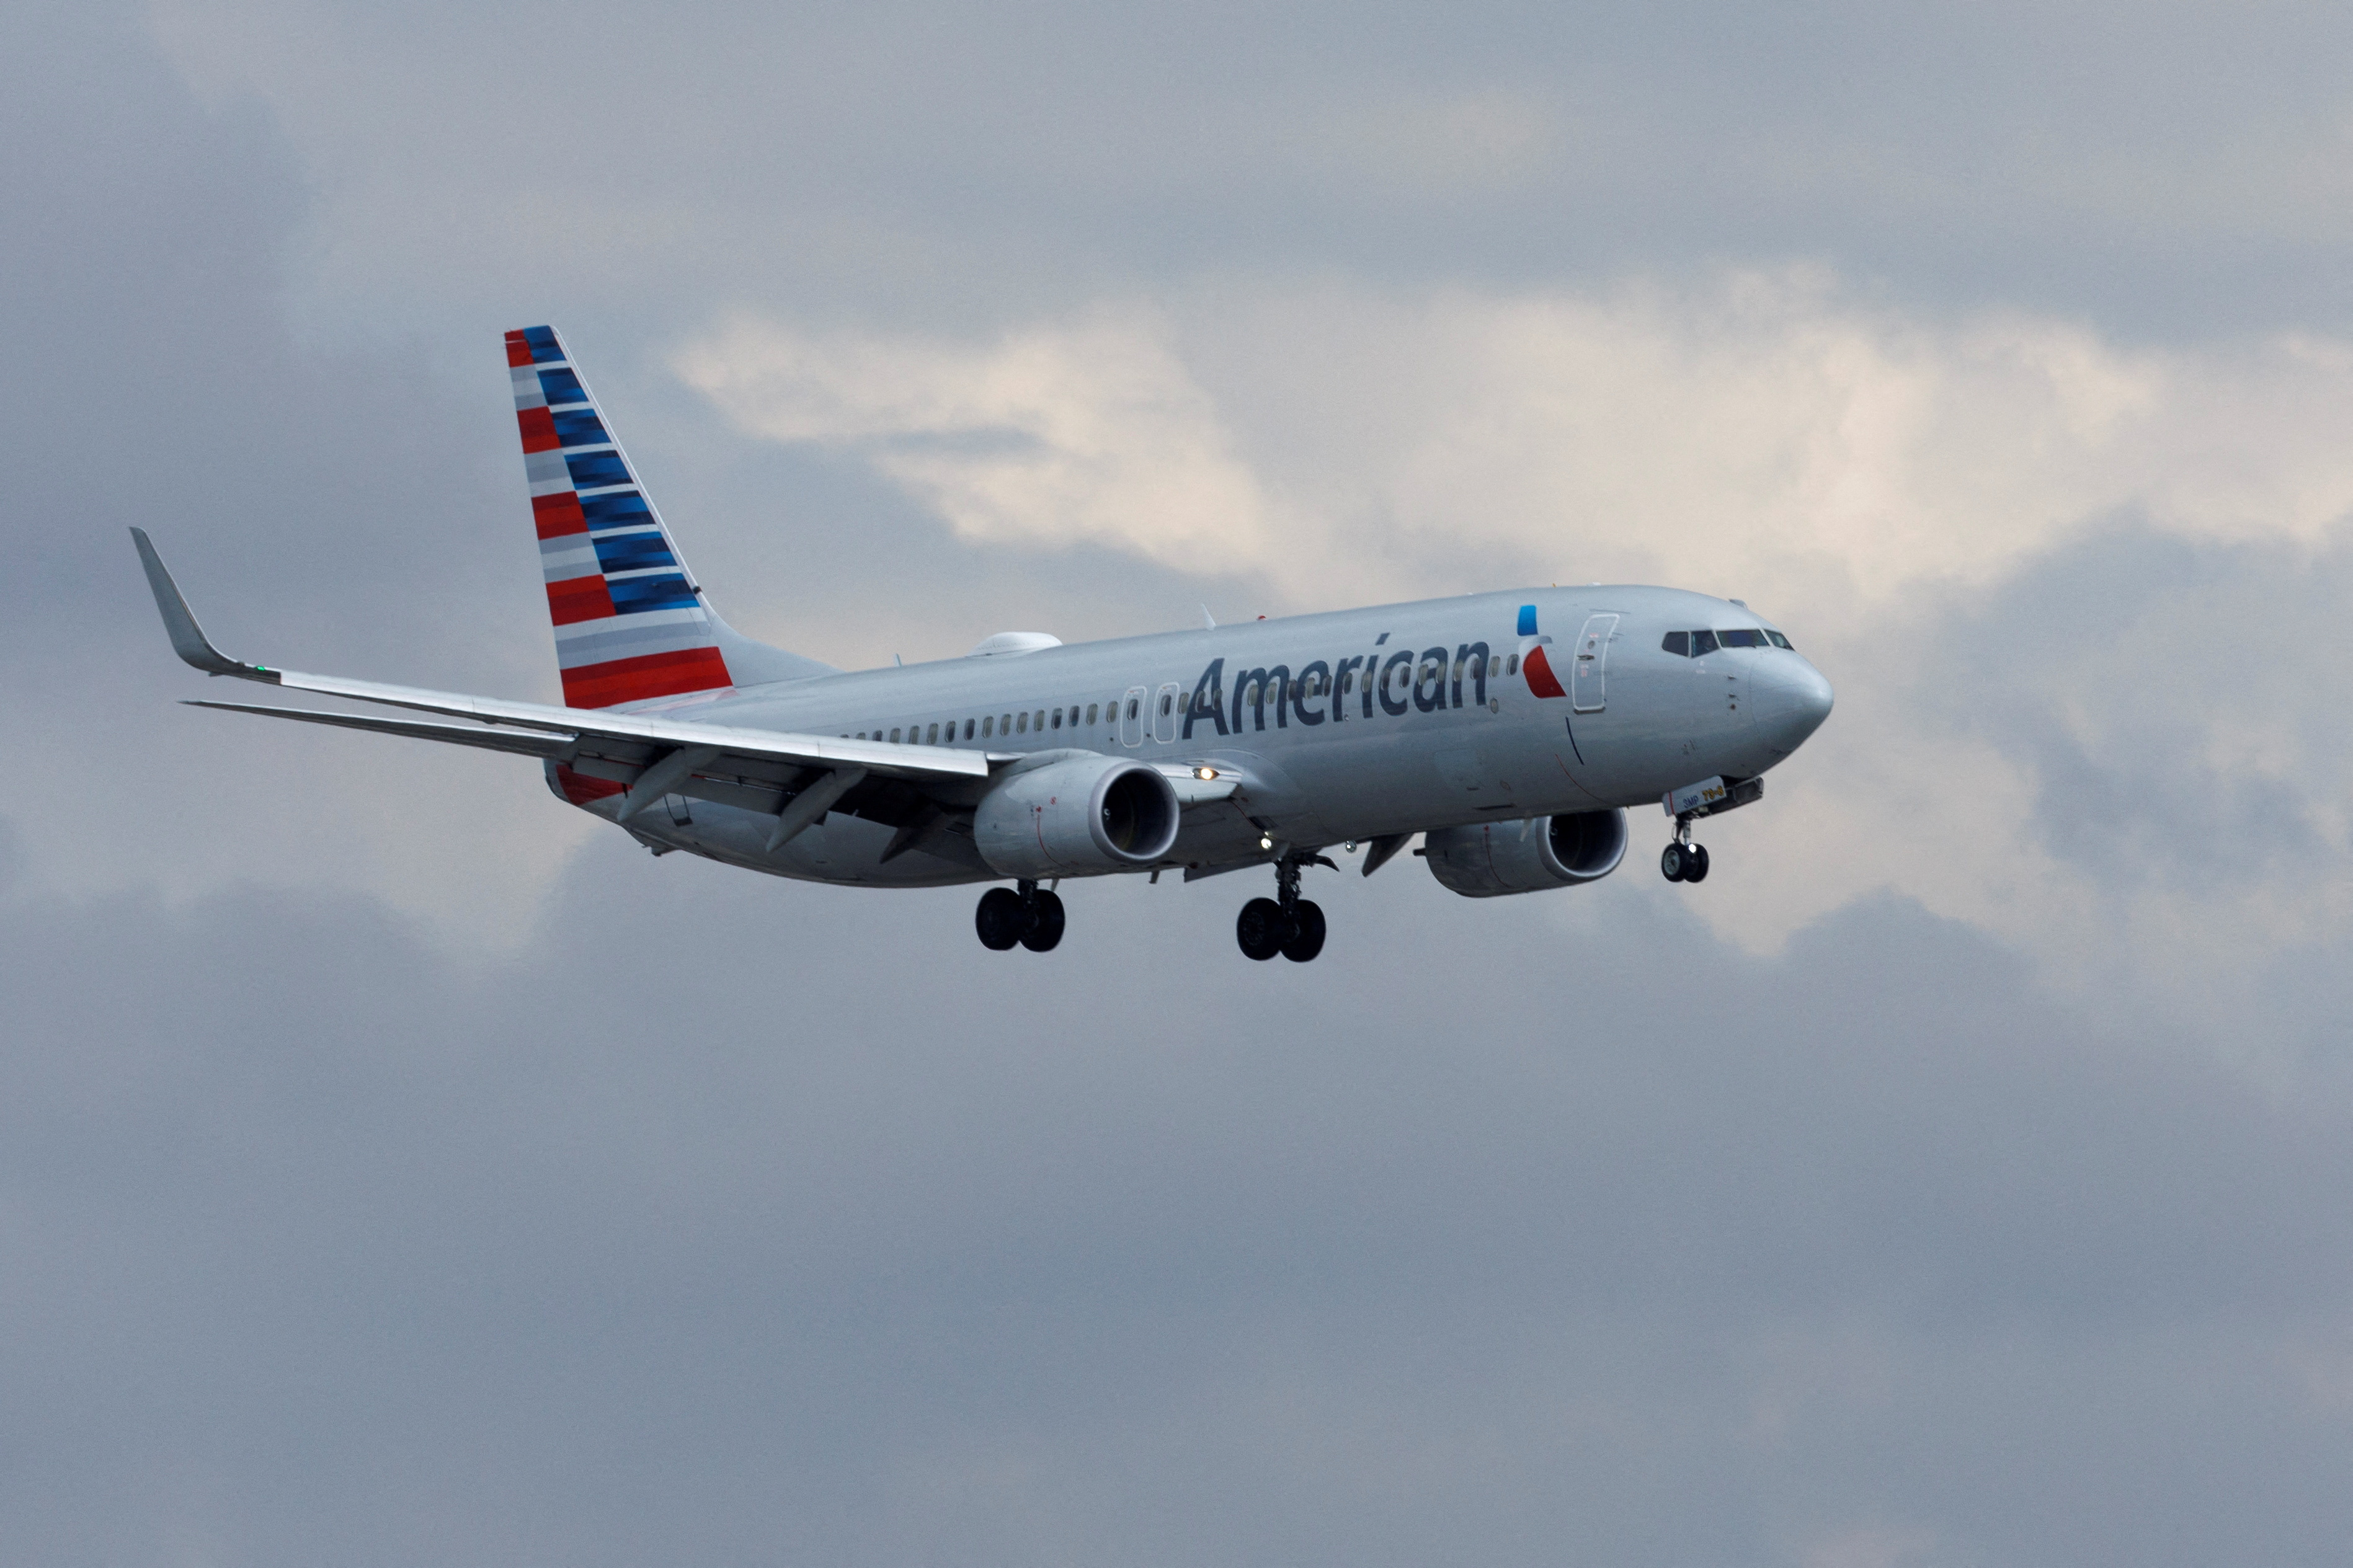 An American Airlines commercial aircraft approaches to land at John Wayne Airport in Santa Ana, California